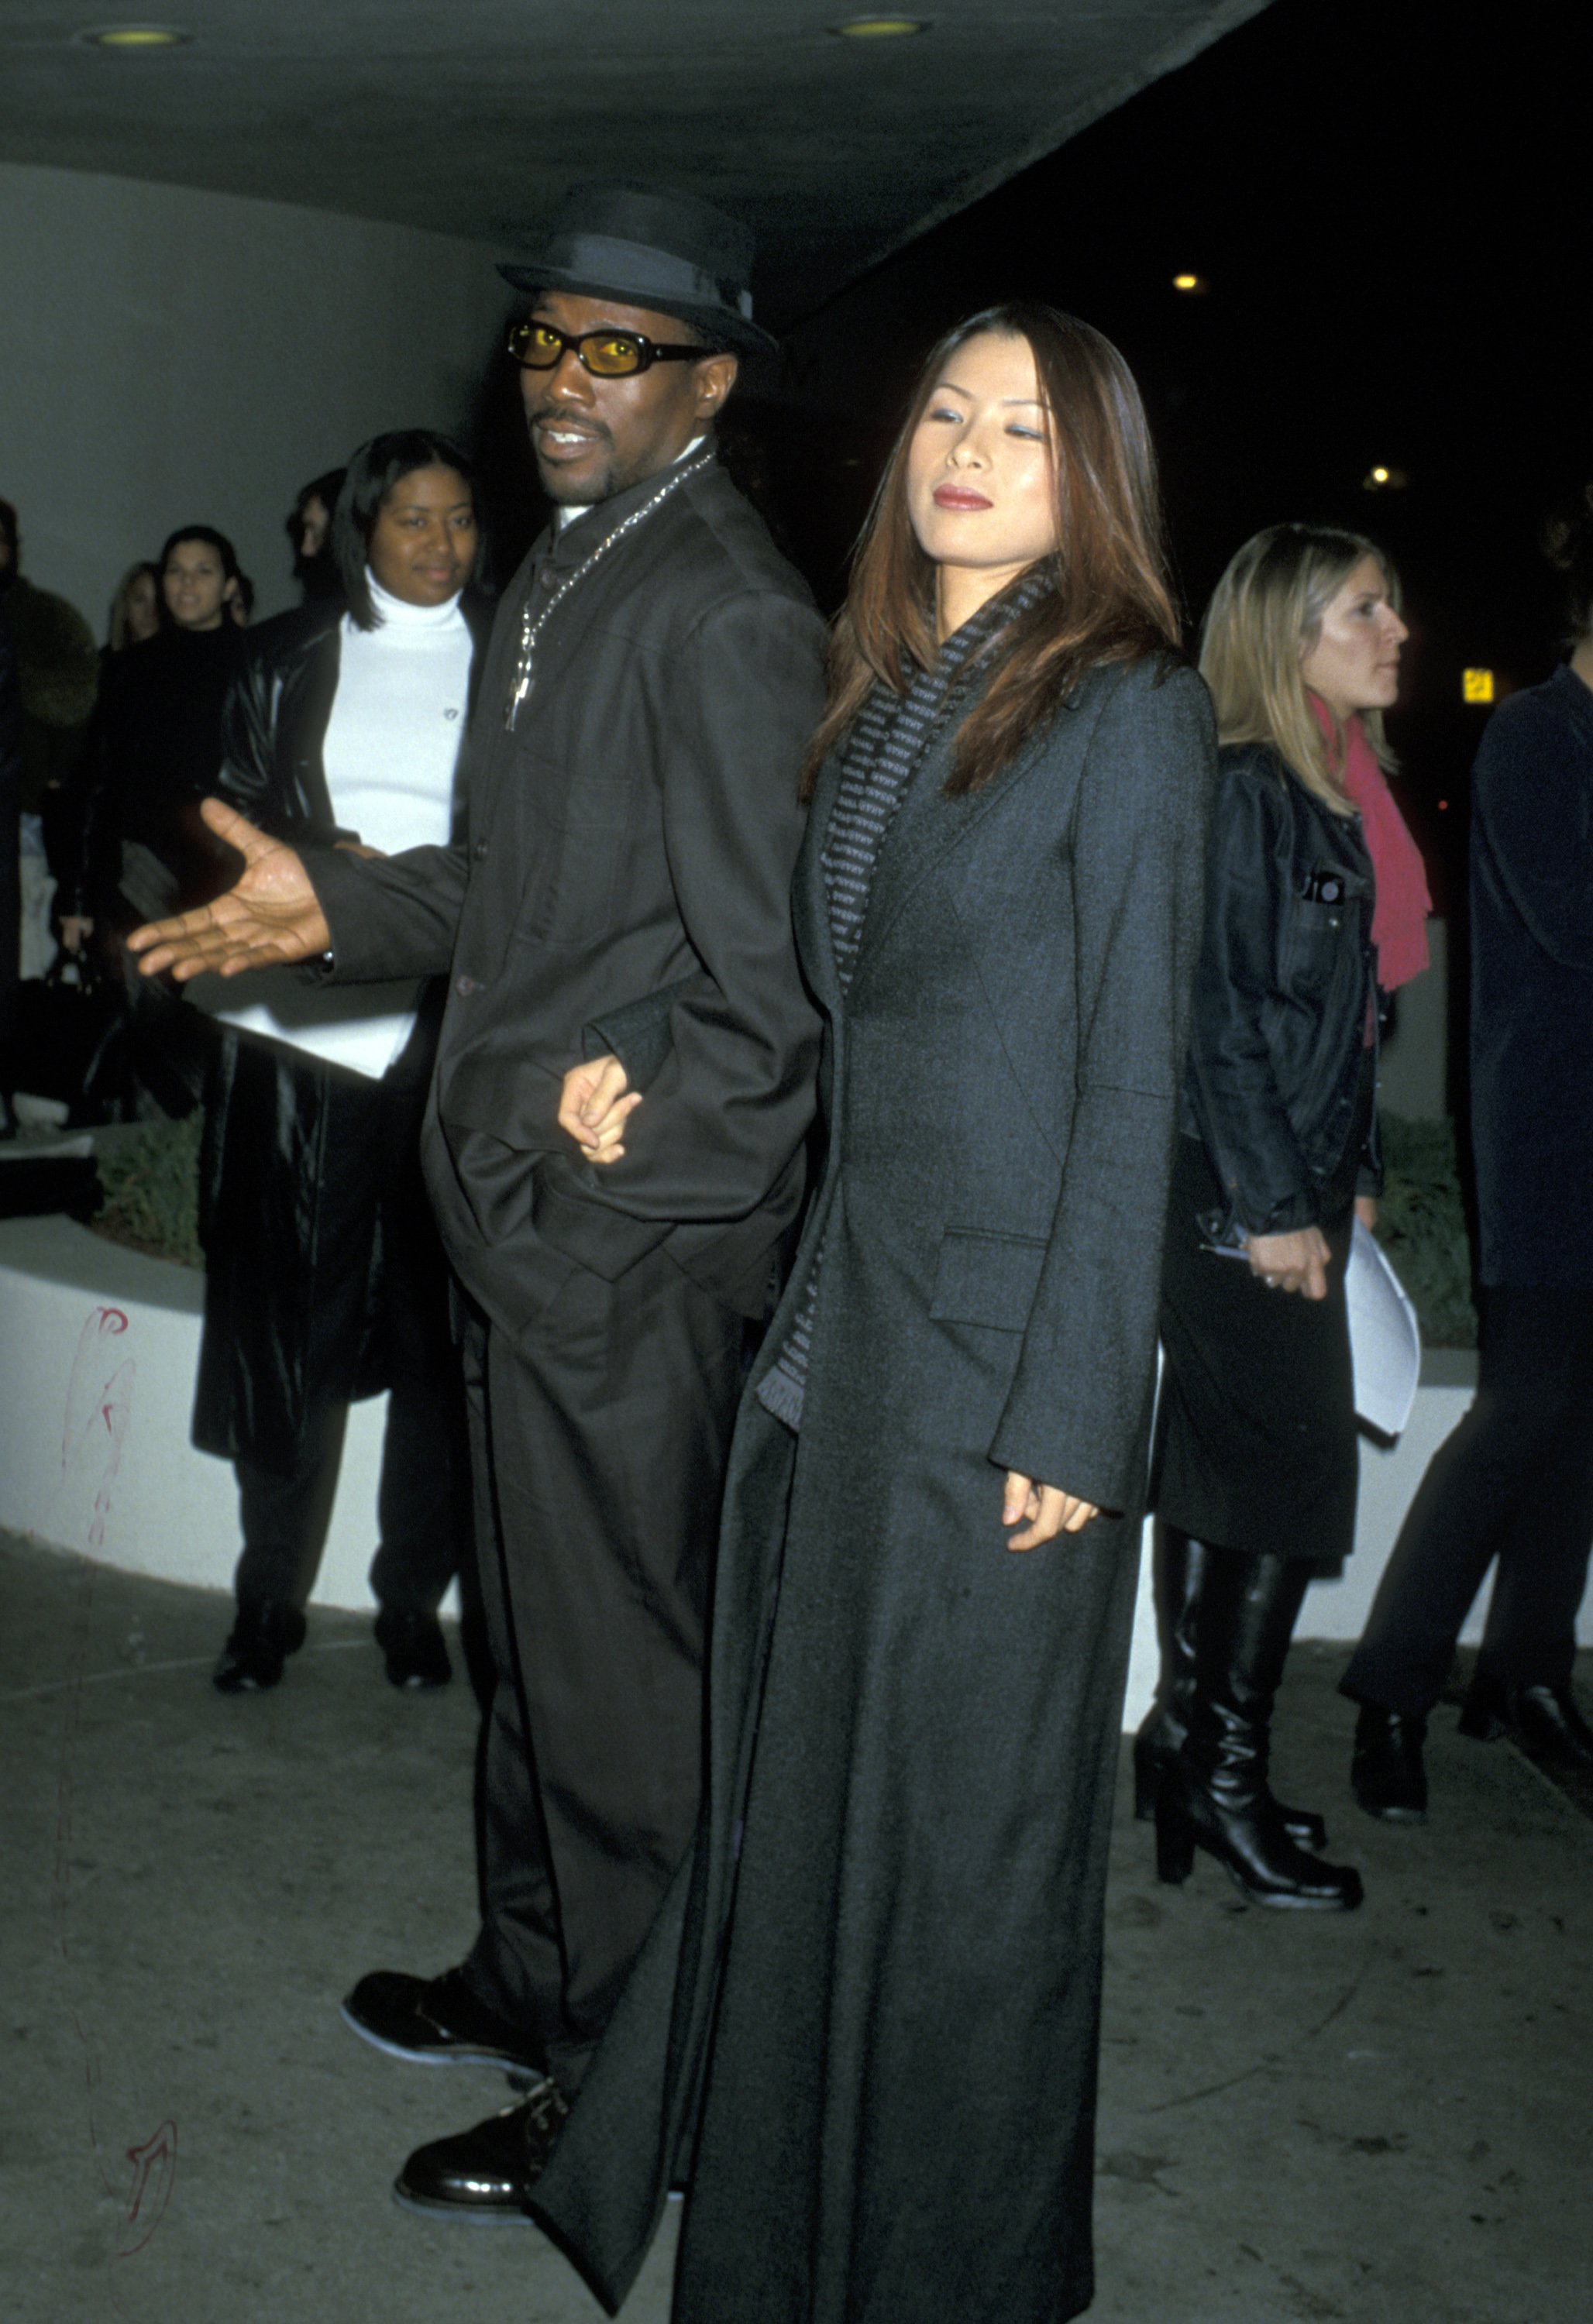 Wesley Snipes and Nikki Park attend the "Once In A Lifetime" premiere on April 7, 2002, in New York. | Source: Getty Images